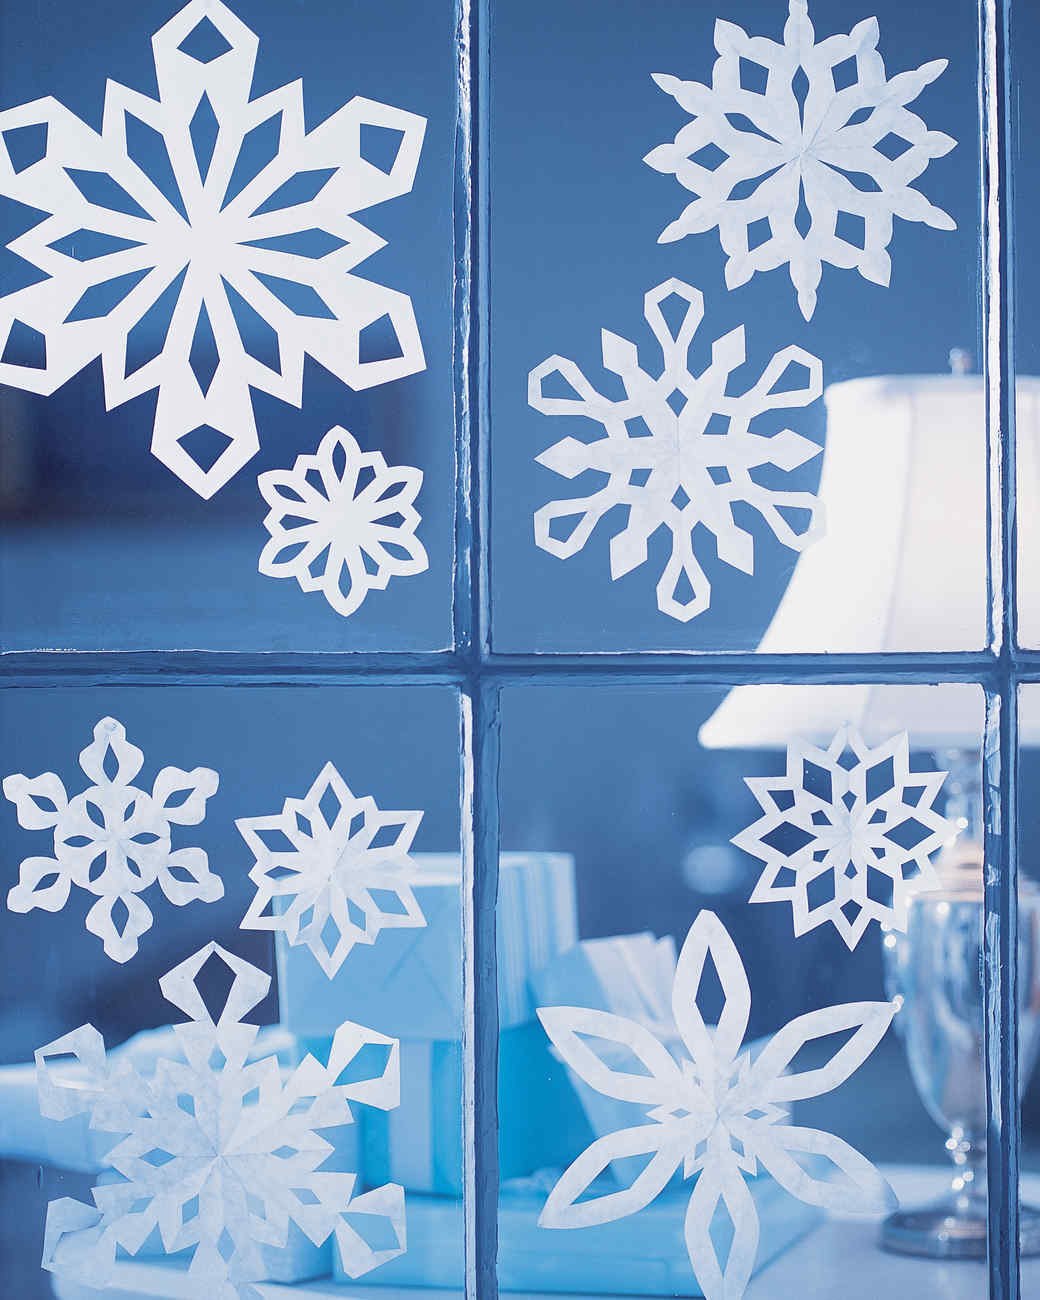 How do you create paper snowflakes?